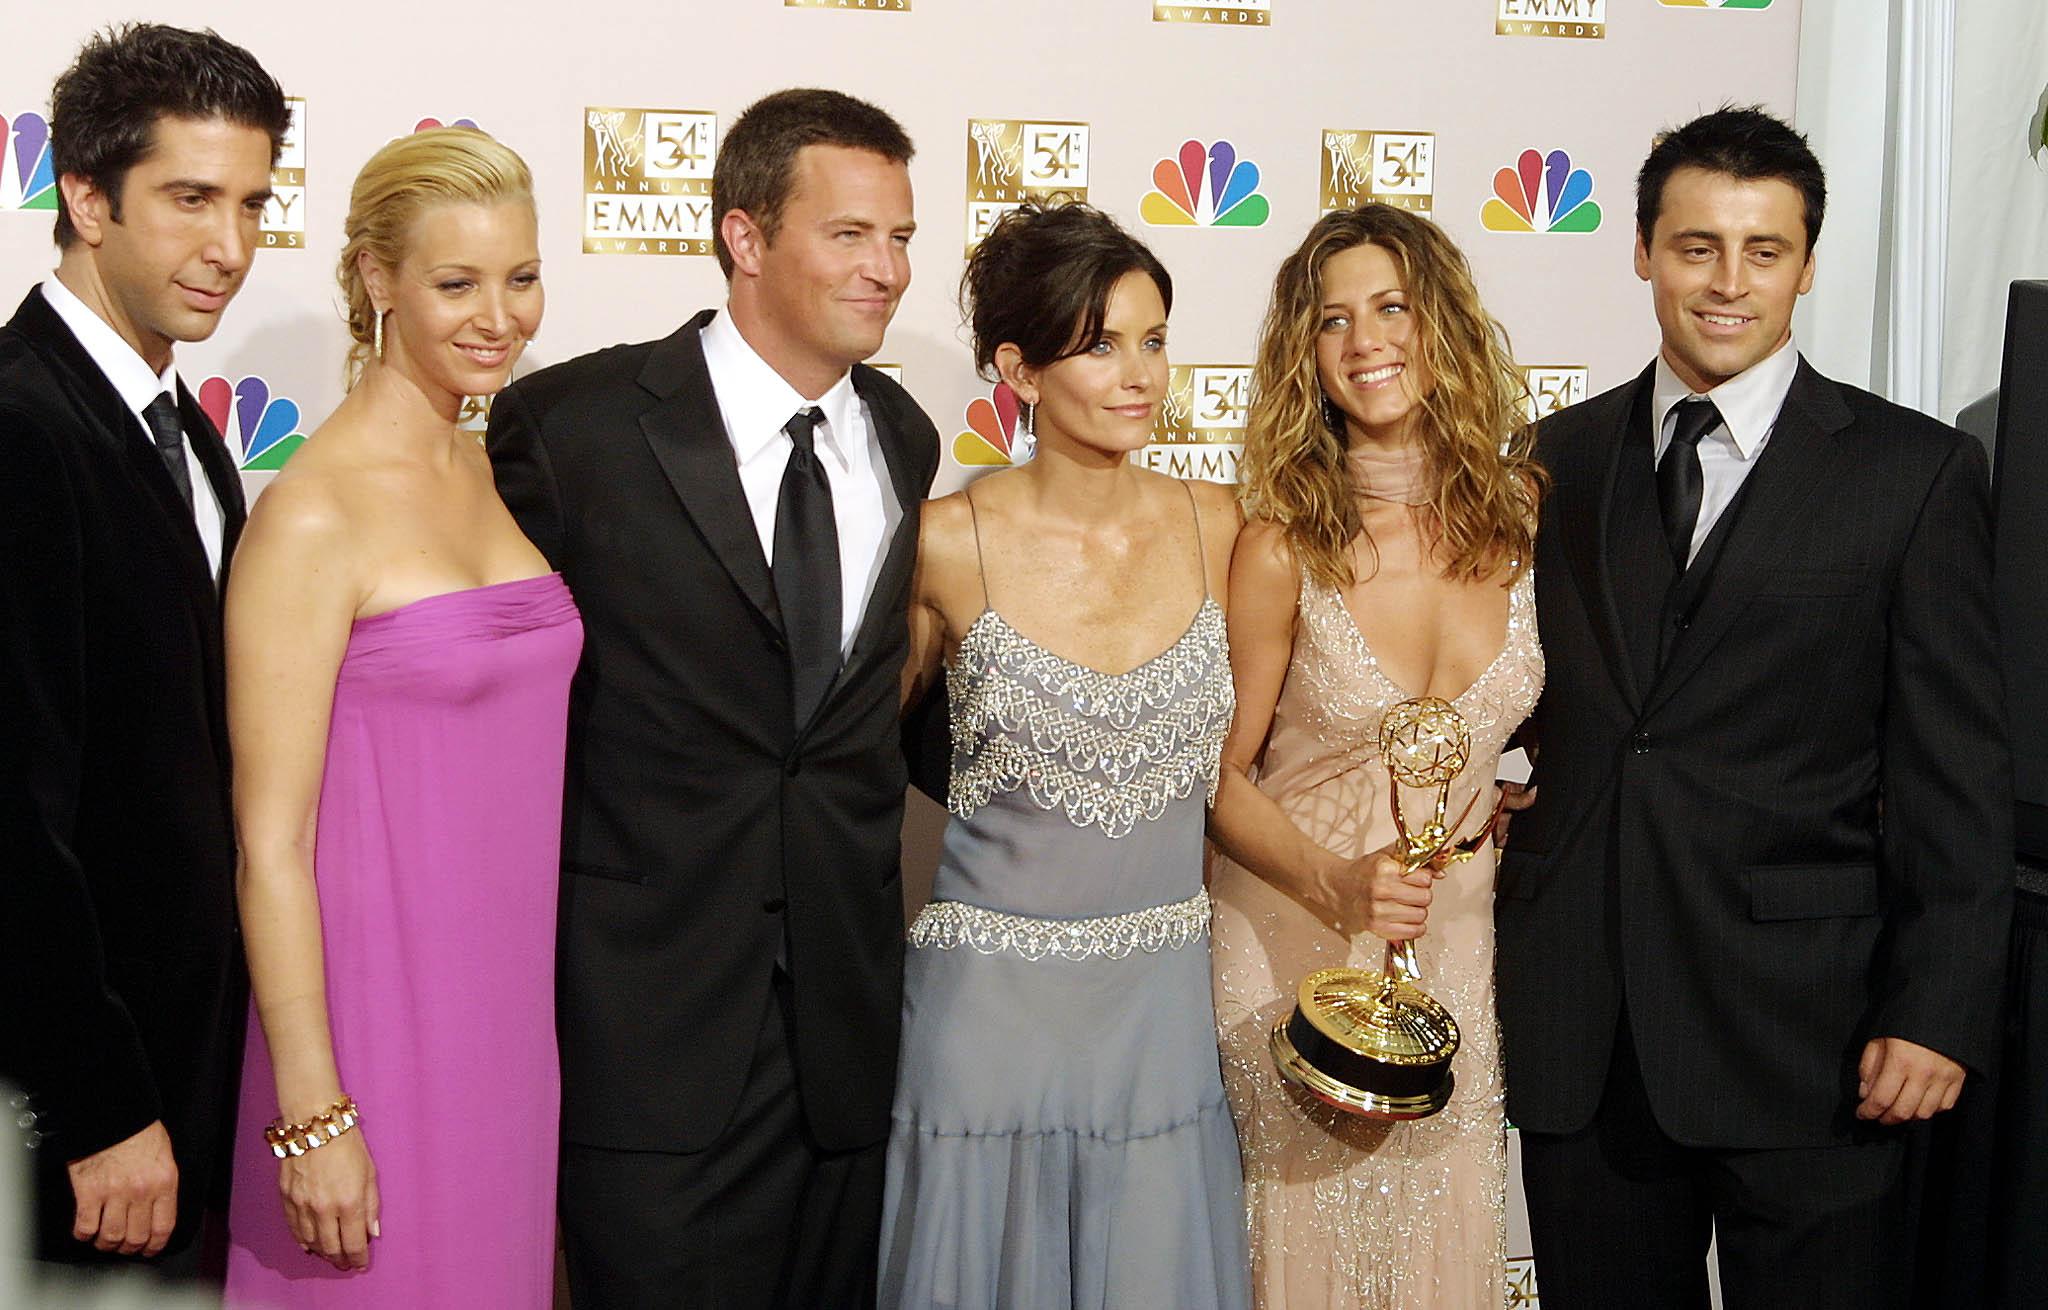 Matthew Perry Will Be In ‘Friends’ Reunion, Thanks To Girlfriend Molly Hurwitz